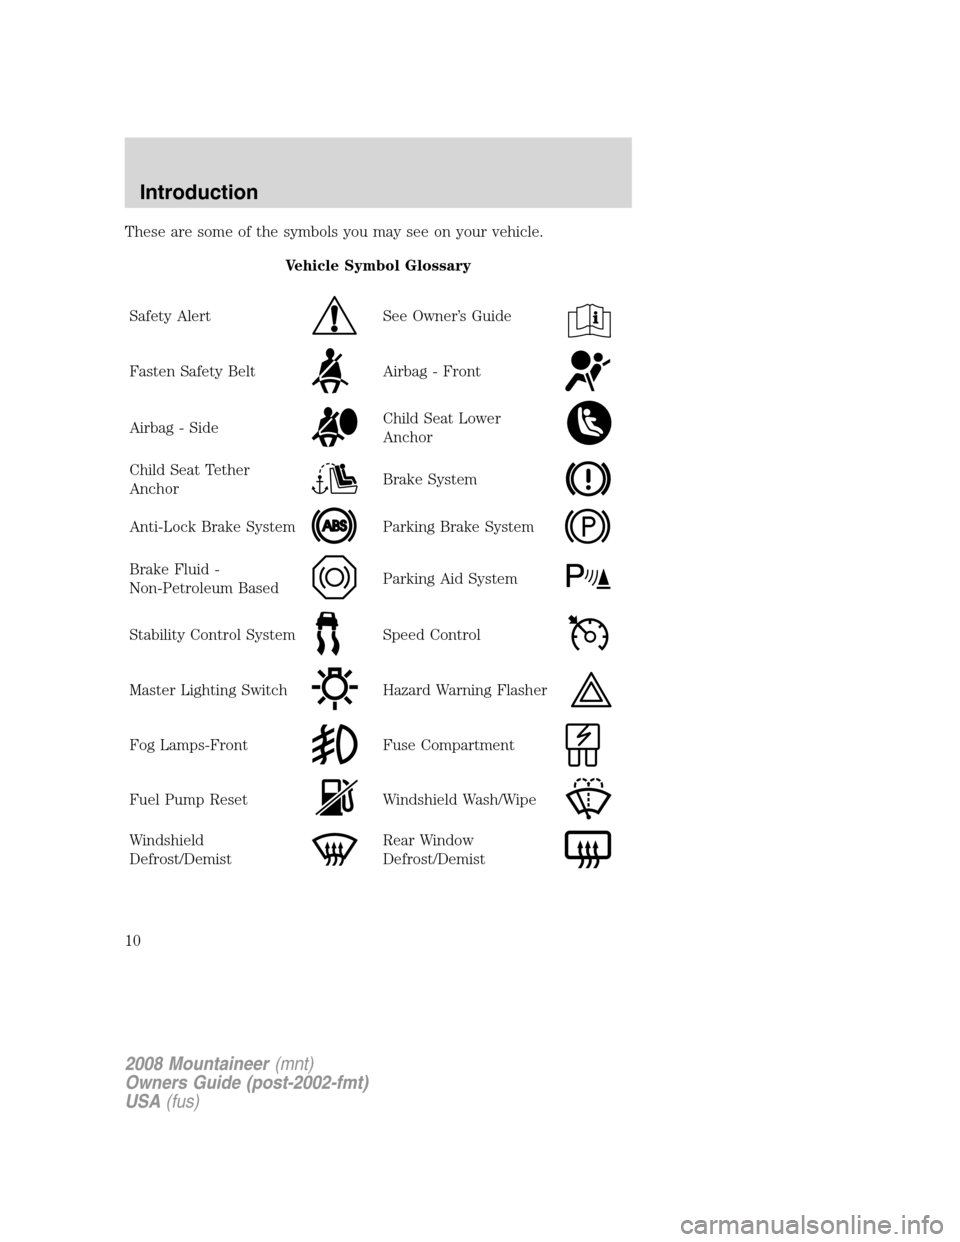 Mercury Mountaineer 2008  Owners Manuals These are some of the symbols you may see on your vehicle.
Vehicle Symbol Glossary
Safety Alert
See Owner’s Guide
Fasten Safety BeltAirbag - Front
Airbag - SideChild Seat Lower
Anchor
Child Seat Tet